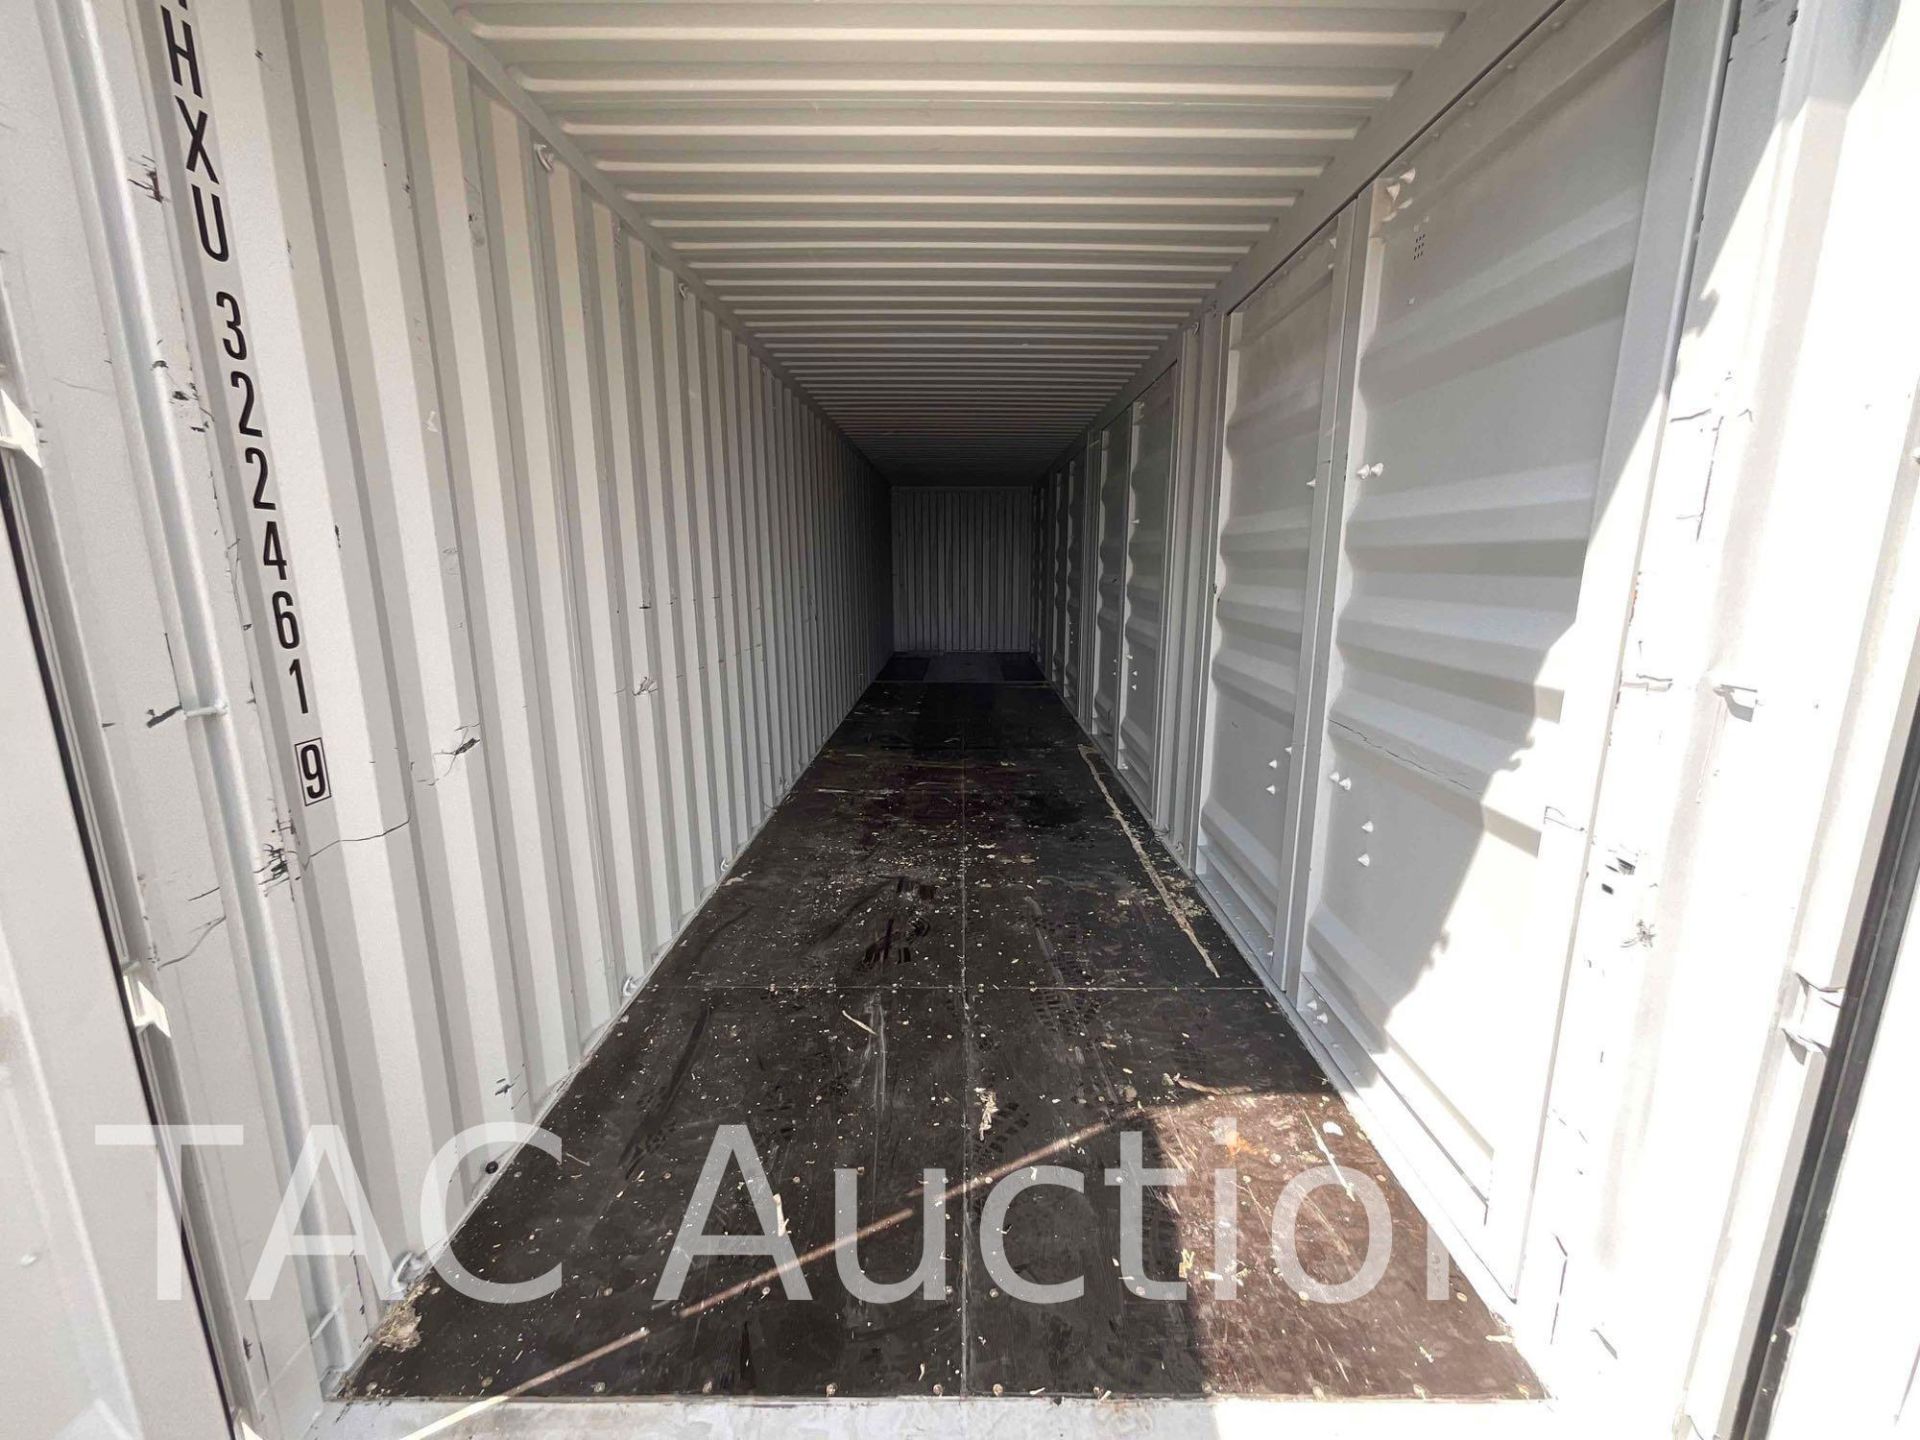 40ft Hi-Cube Shipping Container - Image 8 of 11